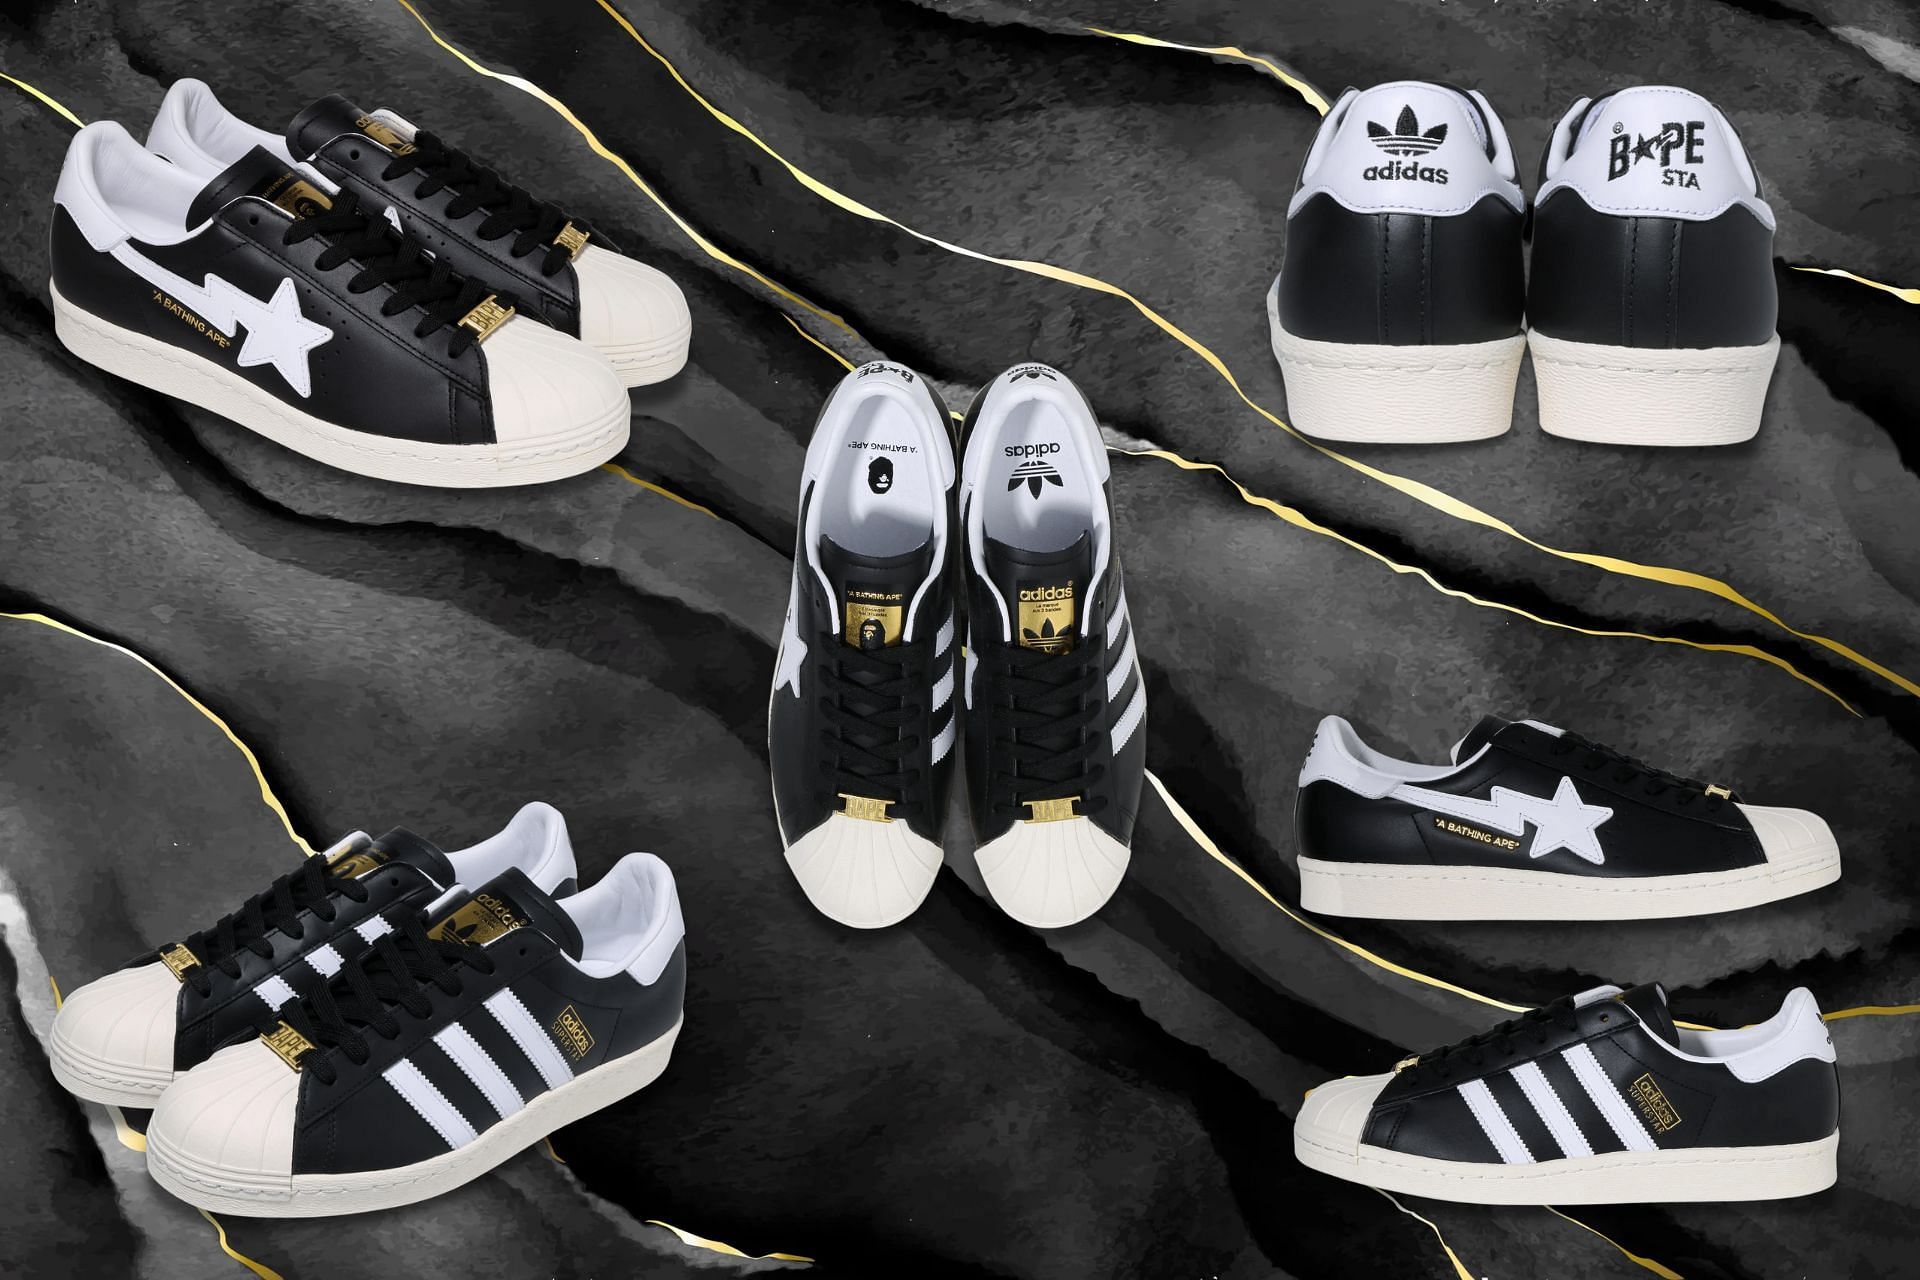 Upcoming A Bathing Ape x Adidas Originals sneakers in a Black and White color palette (Image via Sportskeeda)